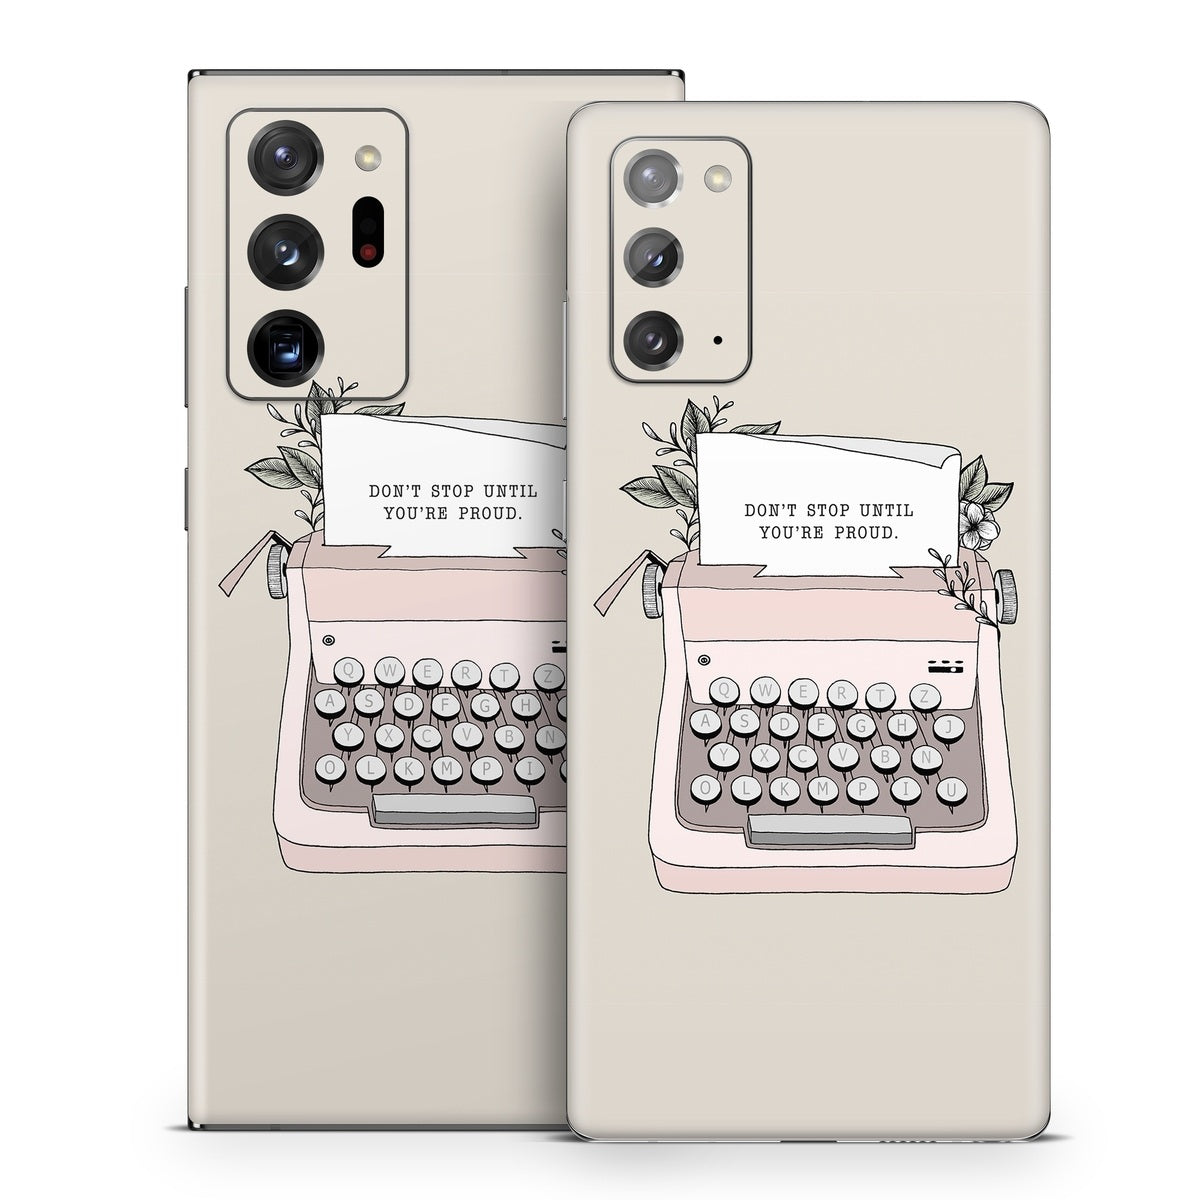 Dont Stop - Samsung Galaxy Note 20 Skin